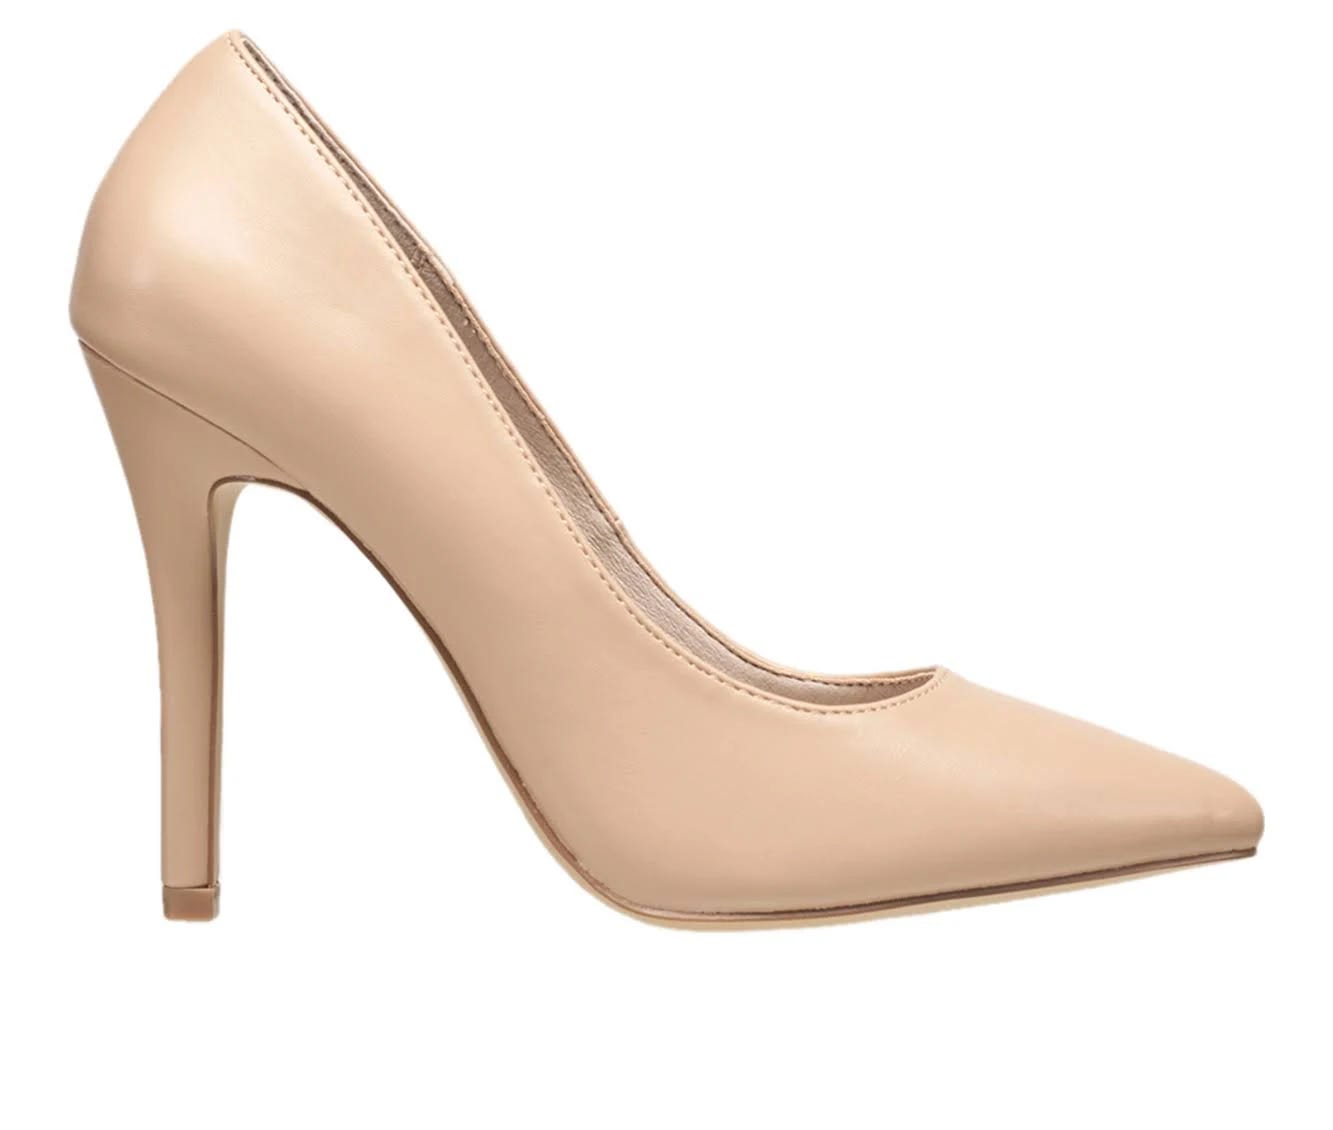 Stylish Tan Pump Heels with Faux Leather Insole | Image